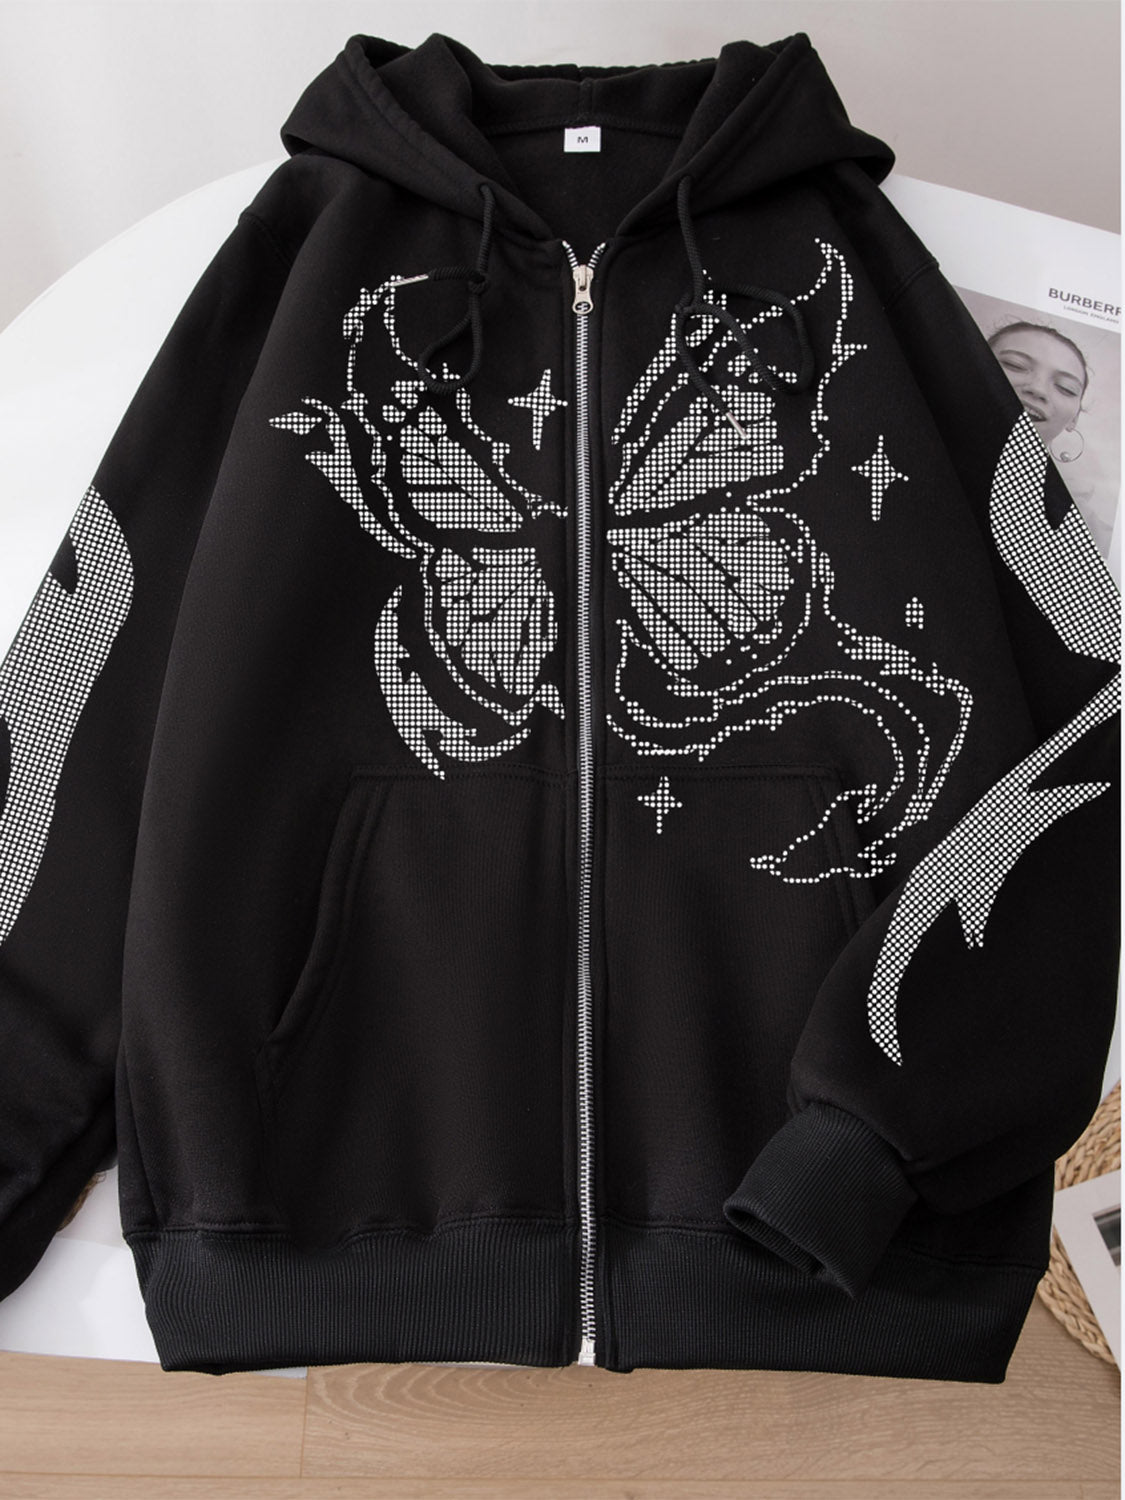 Butterfly Graphic Hooded Jacket - Kawaii Stop - Butterfly Graphic, Casual Chic, Comfortable Fit, Drawstring, Fashion, Fashion Statement, Hooded Jacket, Hoodies, Pockets, S&M&Y, Ship From Overseas, Shipping Delay 09/29/2023 - 10/05/2023, Soft Polyester, Stylish Outerwear, Sweatshirts, Versatile Jacket, Winter Fashion, Women's Clothing